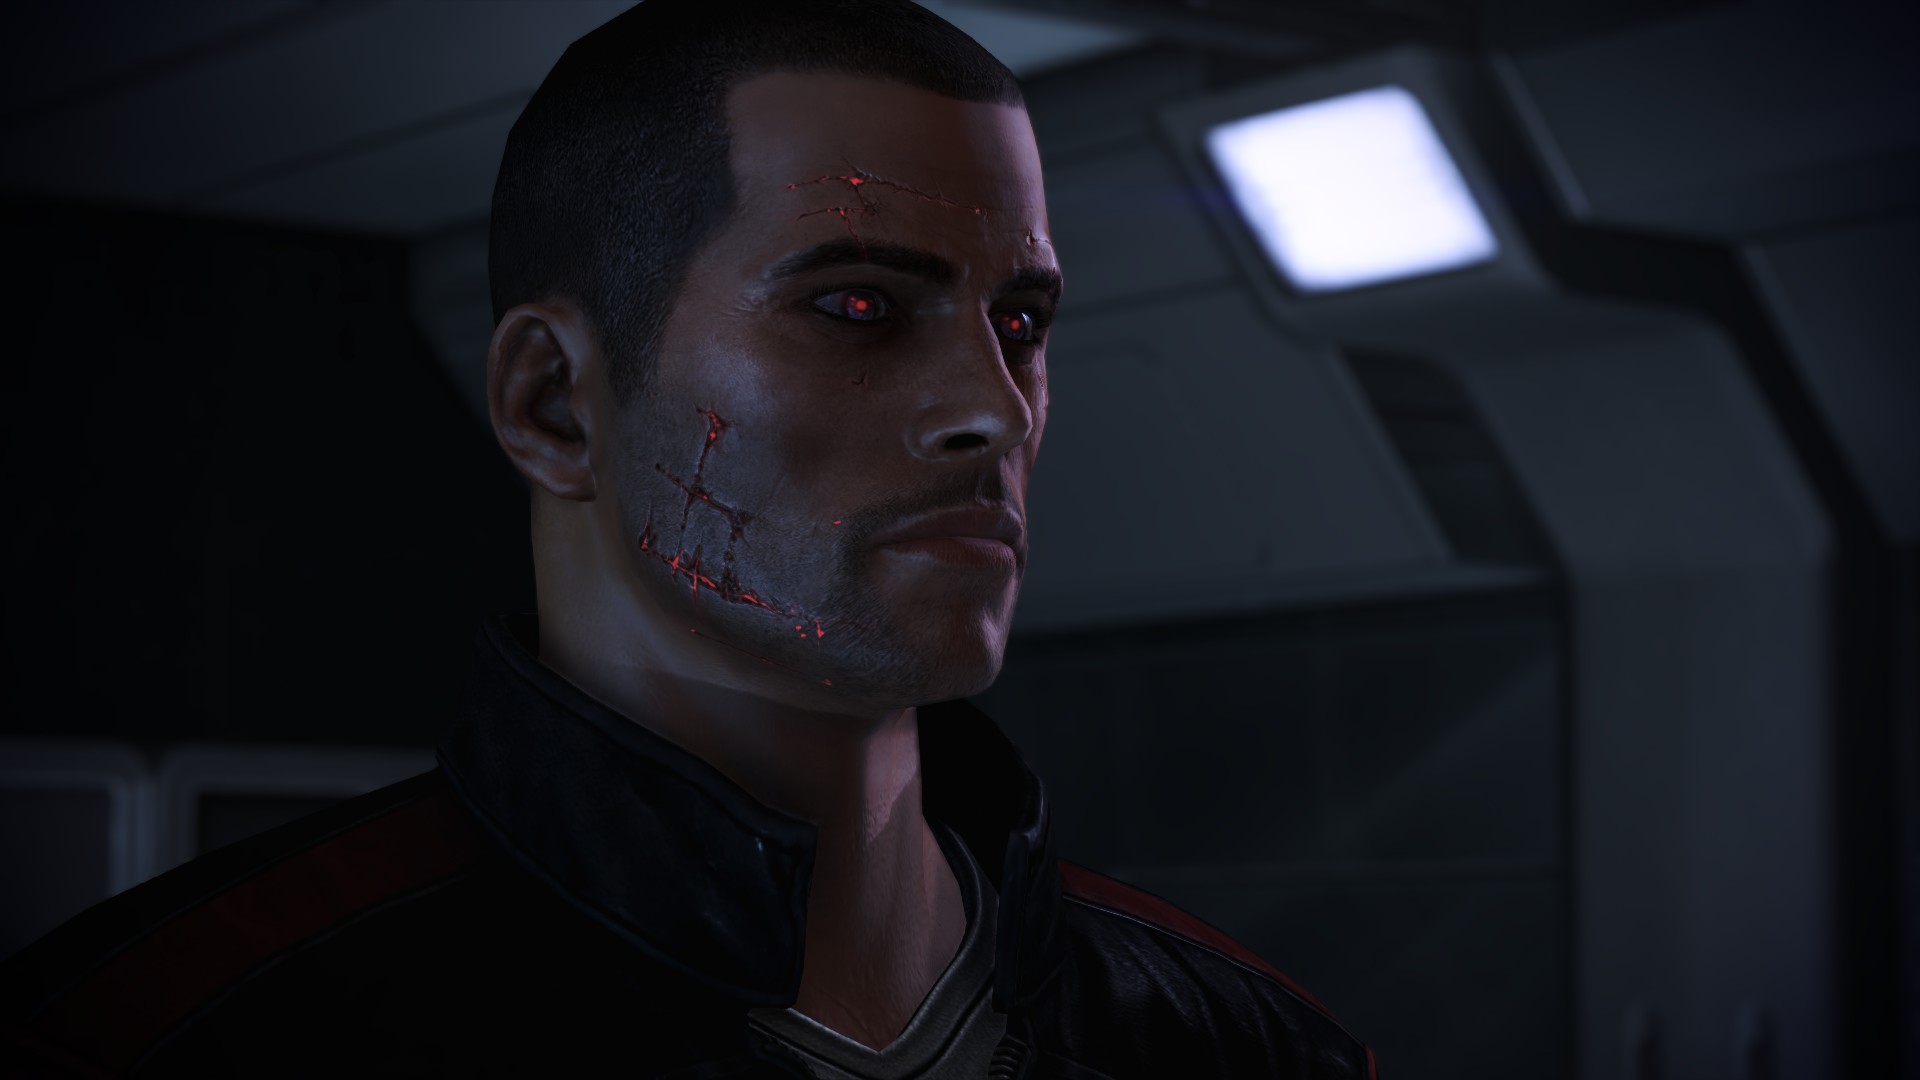 Mass Effect™ Legendary Edition - Game Information to Modding and Configuration - Let's make Mass Effect: Legendary Edition great - 51FA841